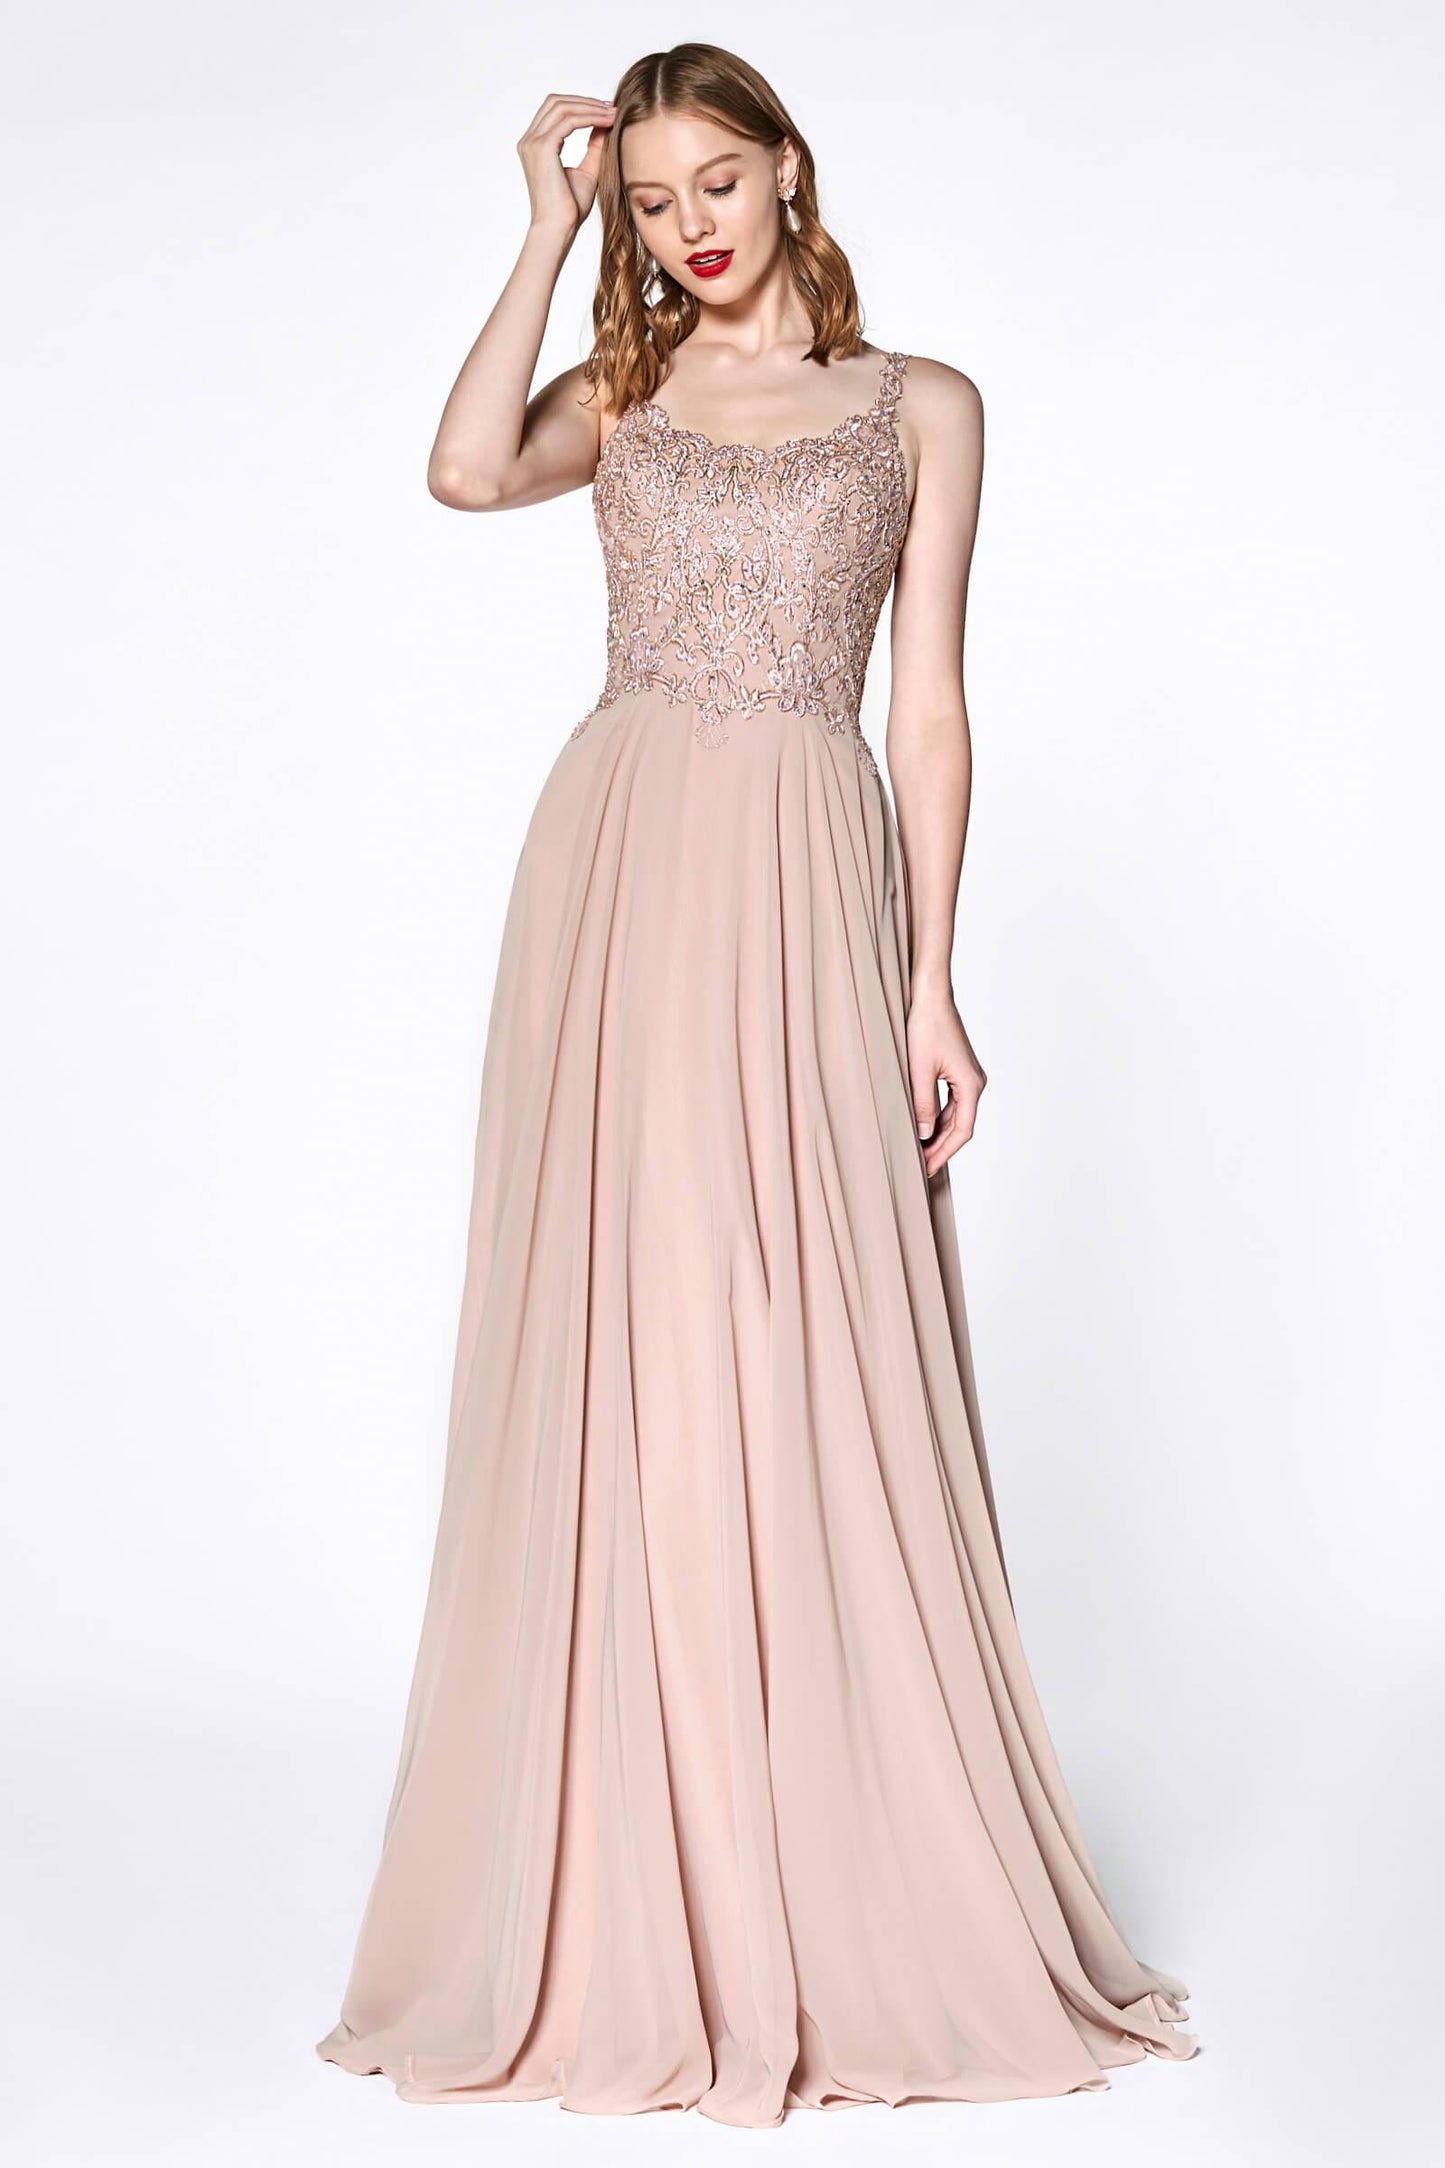 Long Prom Dress Formal Evening Gown - The Dress Outlet Cinderella Divine